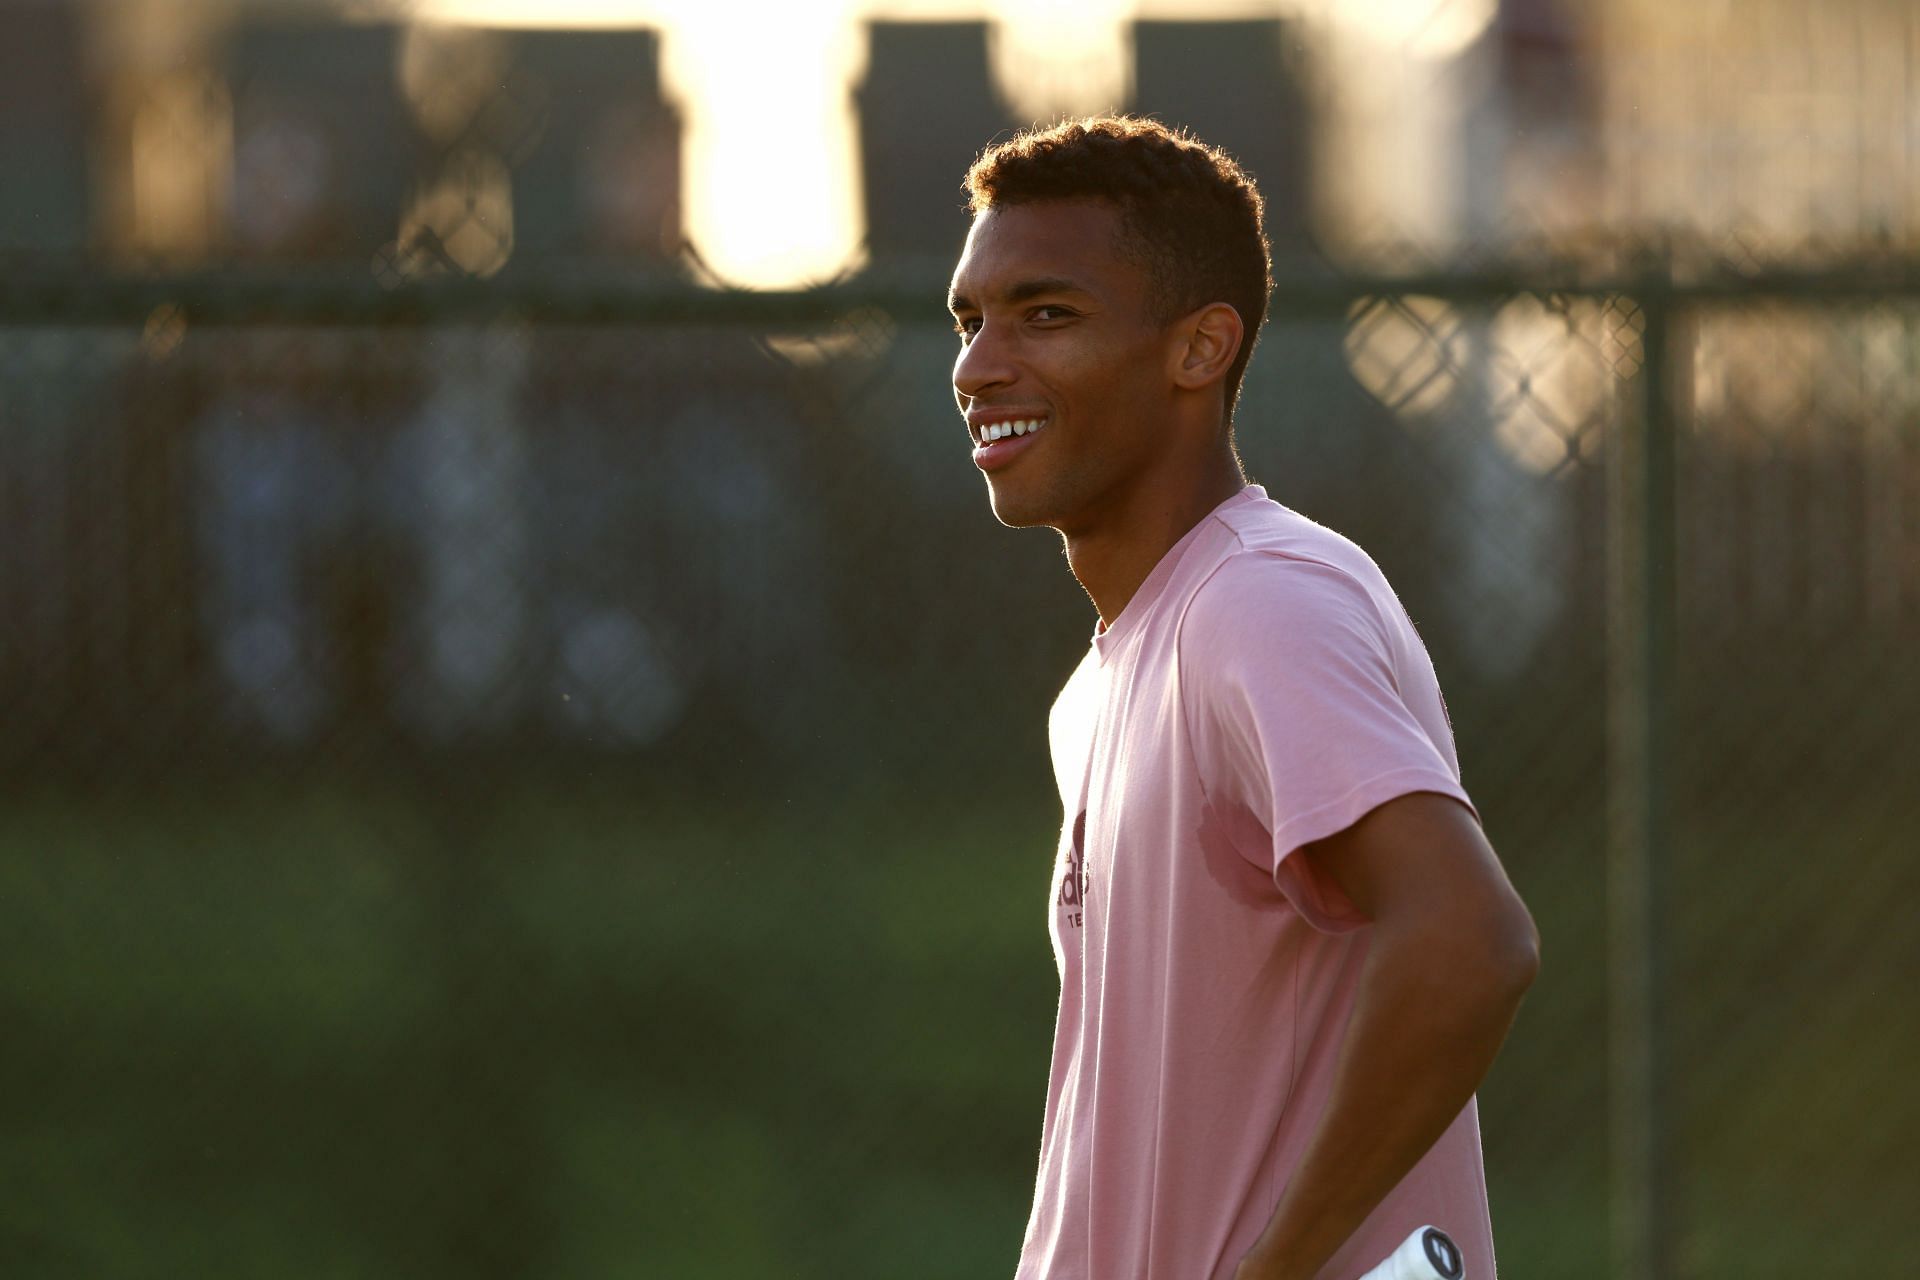 Felix Auger-Aliassime at the 2022 Indian Wells Masters.